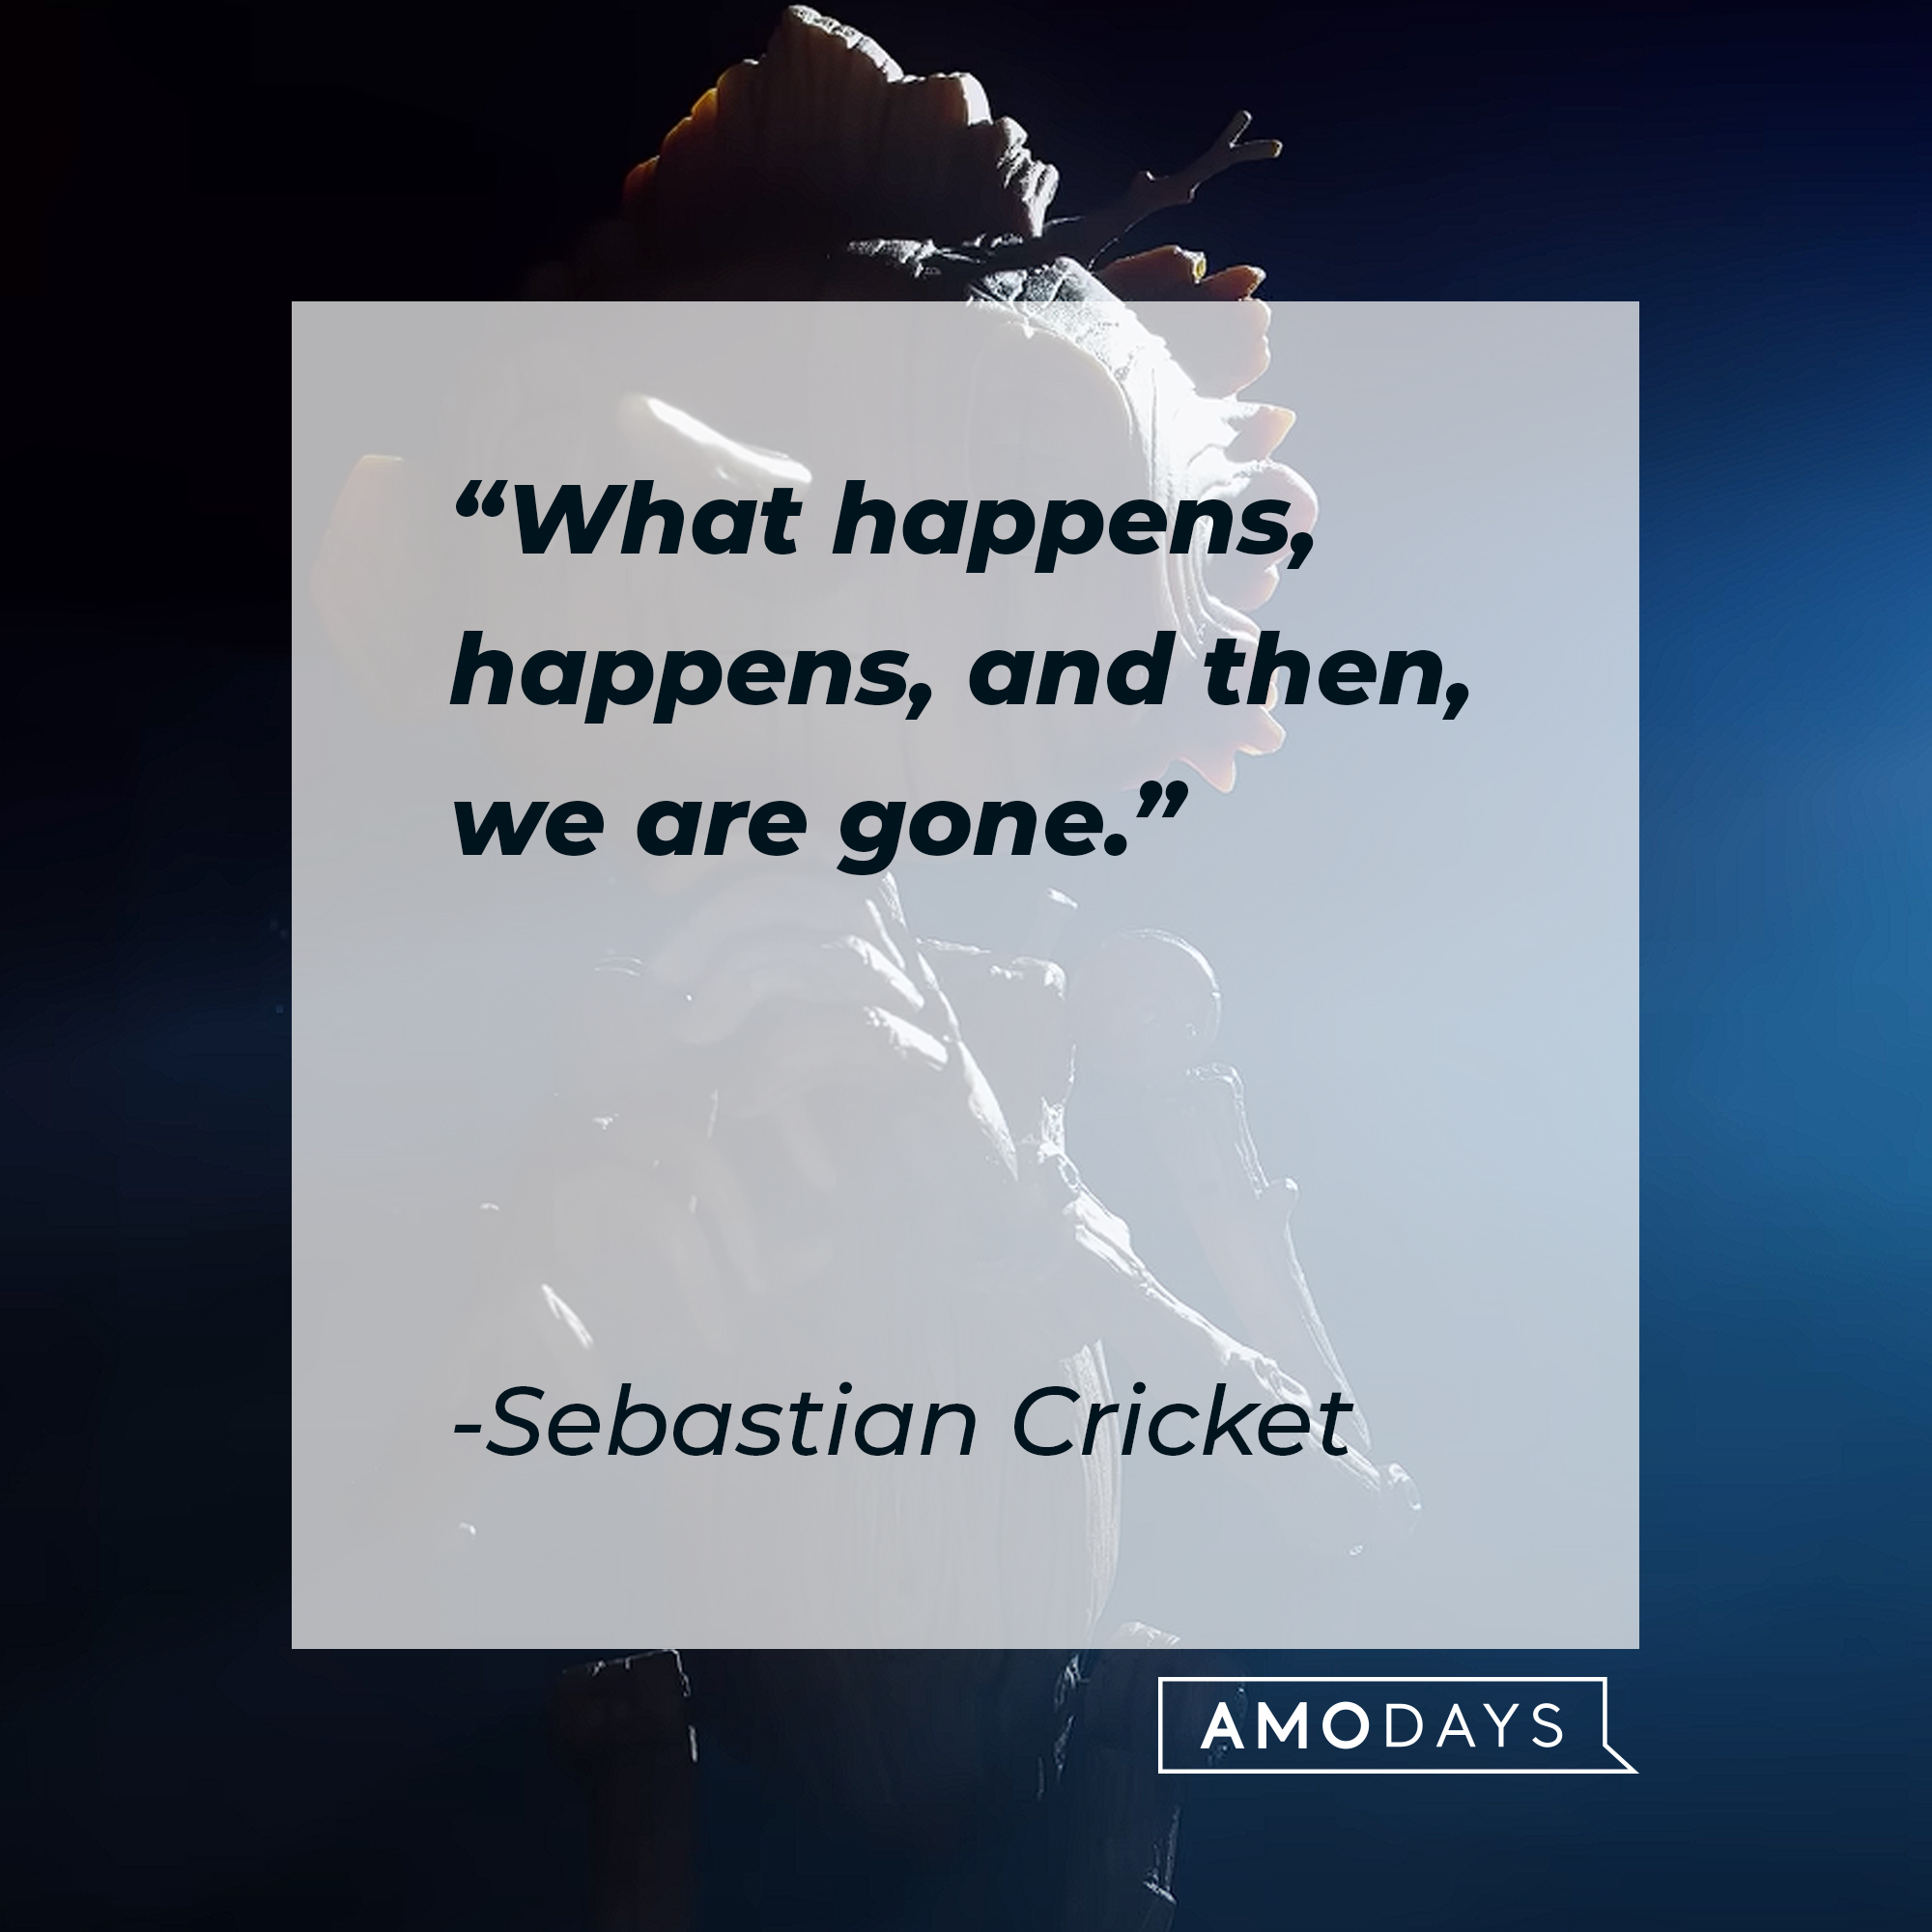 Sebastian Cricket's quote: "What happens, happens, and then, we are gone." | Image: AmoDays